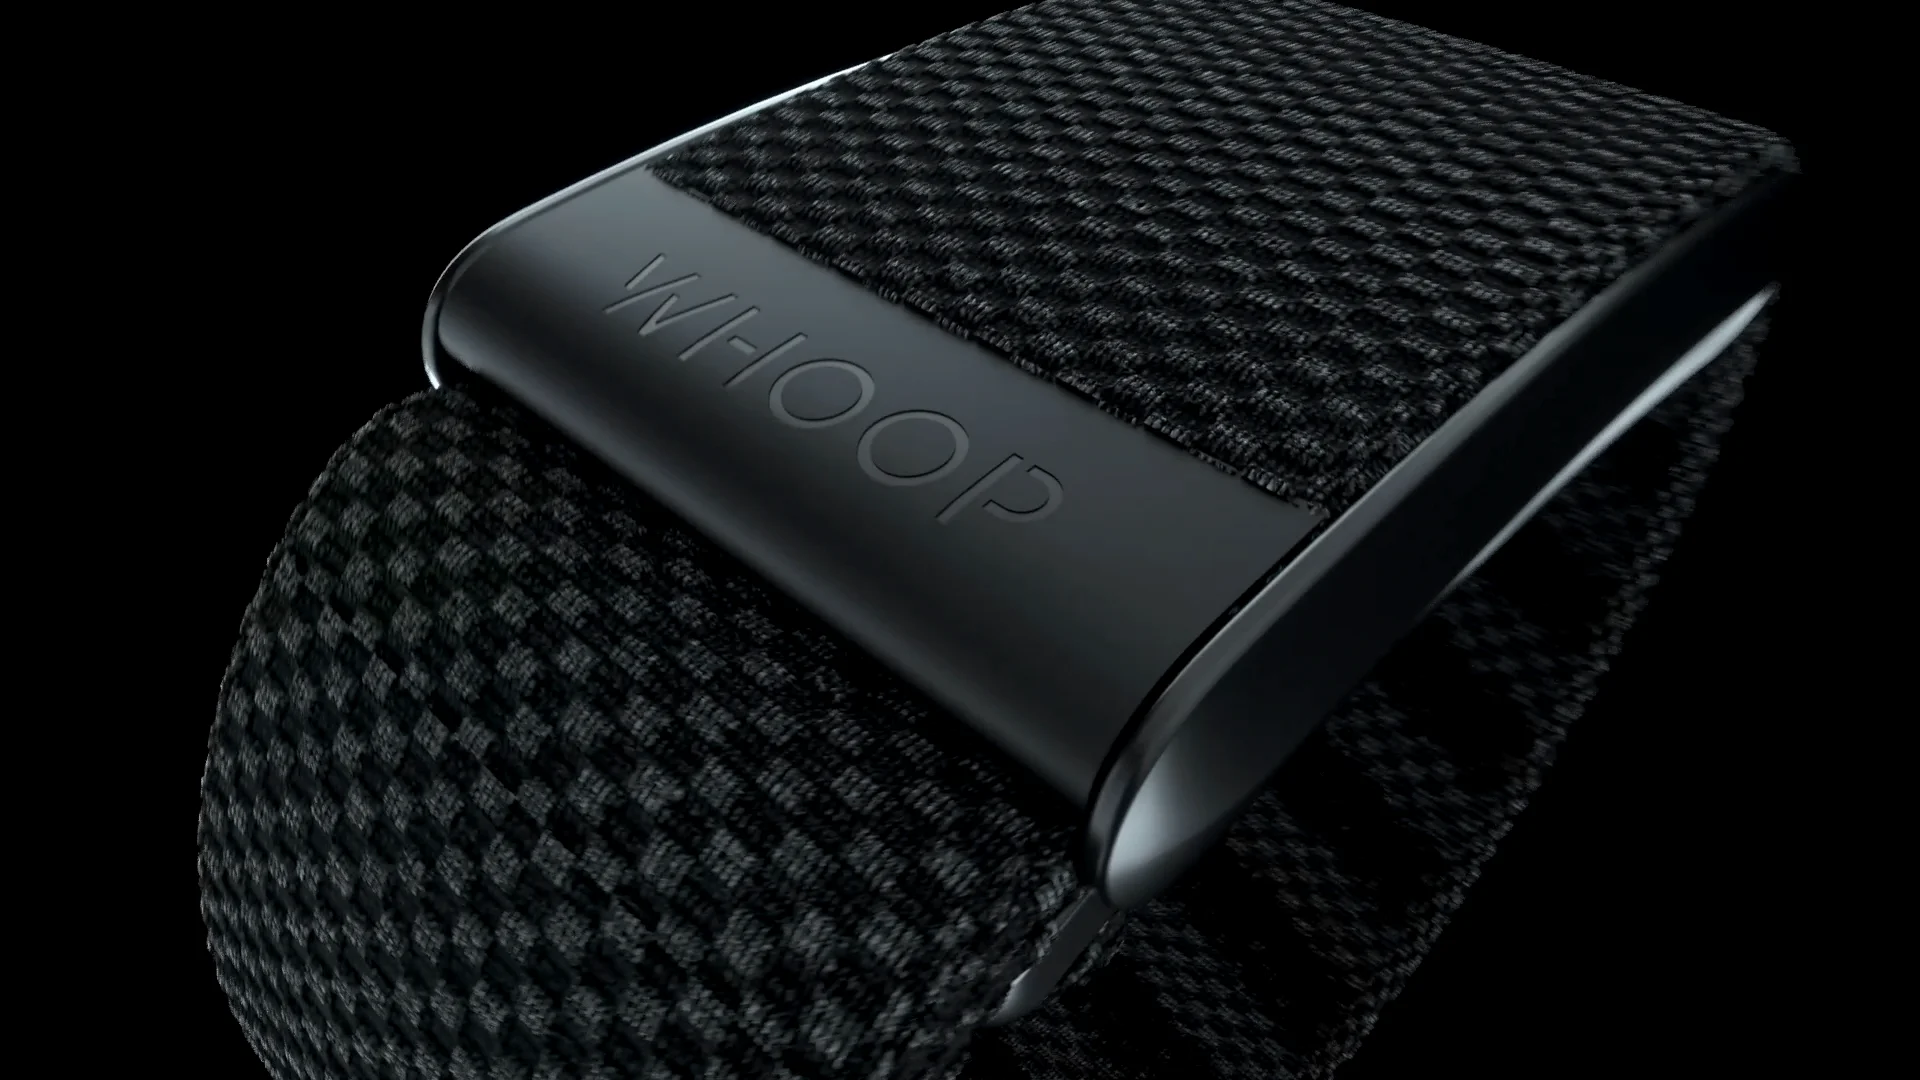 The sleek and stylish WHOOP 4.0 Band in classic onyx color.